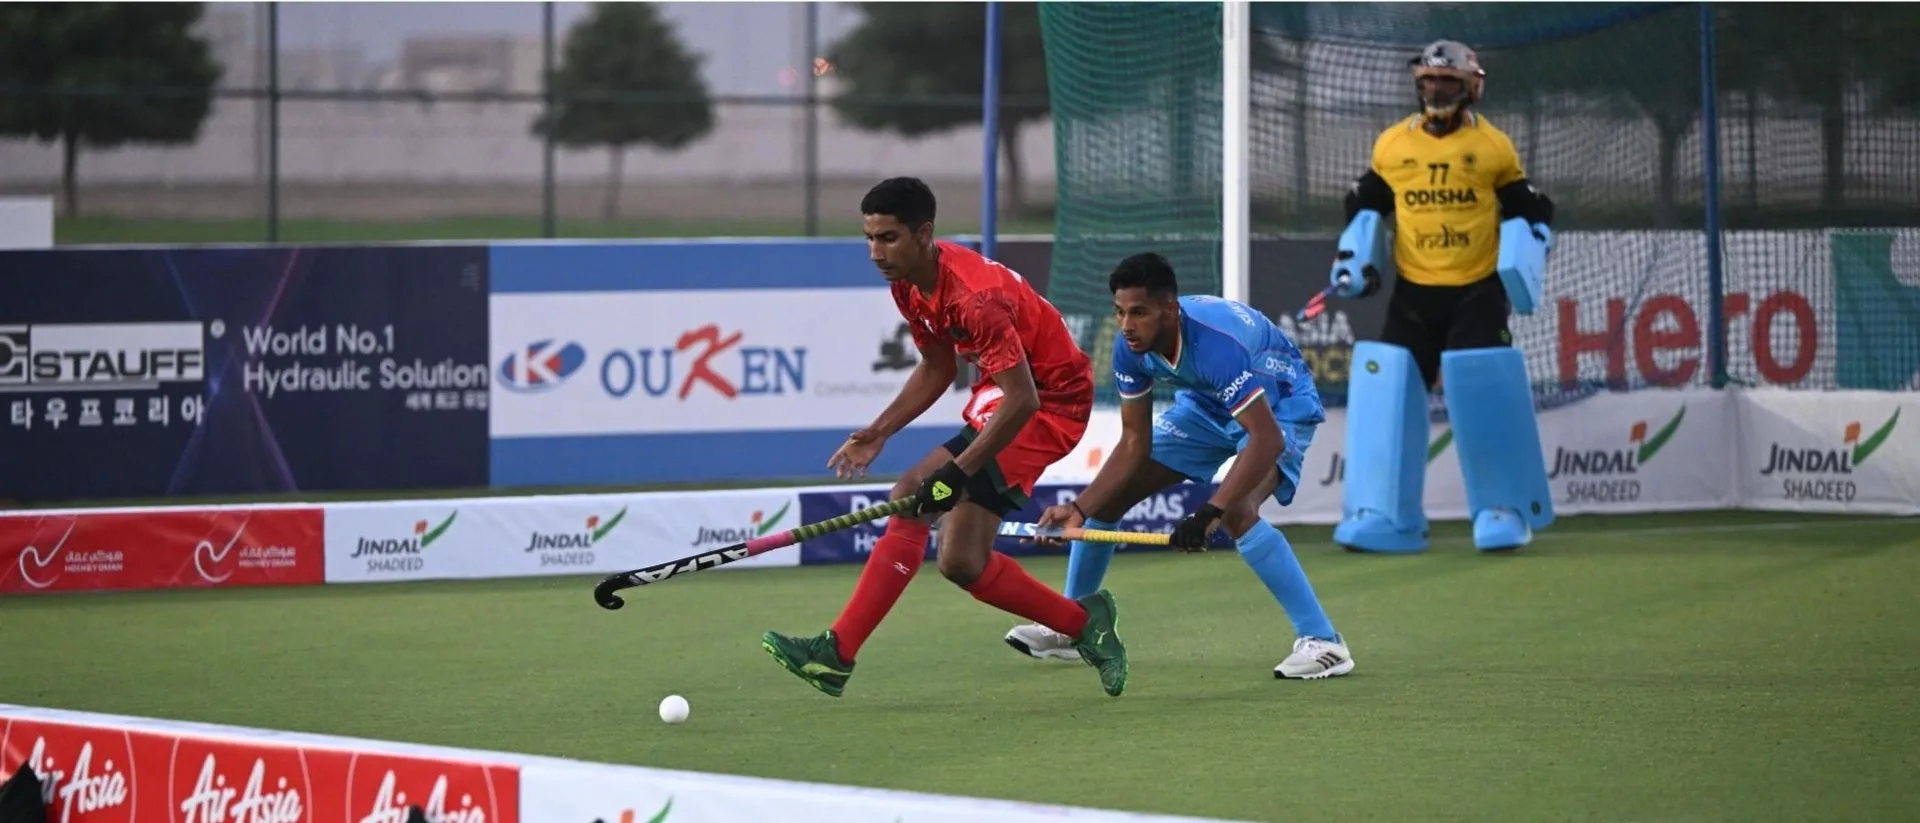 India fire 15 goals against Bangladesh at Men's Asian Hockey 5s World Cup Qualifier